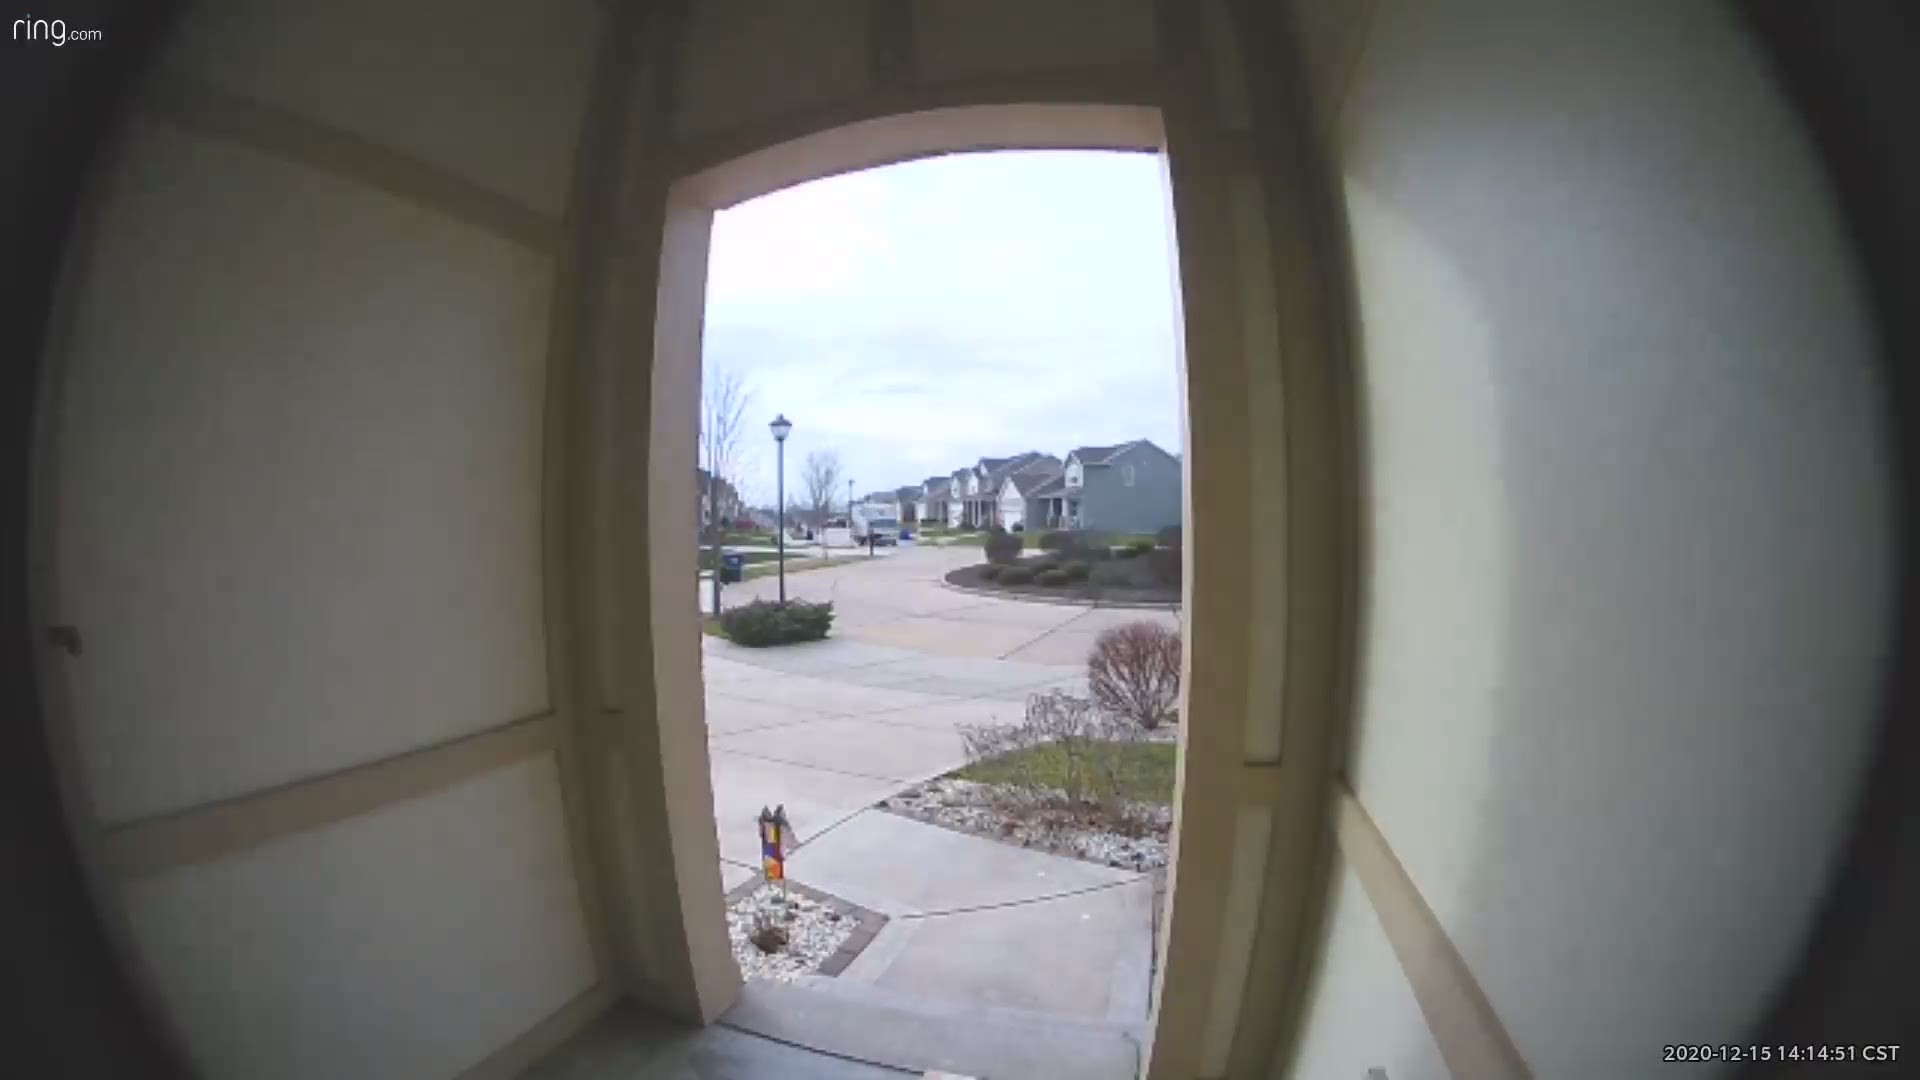 St. Charles County police released video showing the suspect pull up to a home in an Enterprise trick and take a package from the porch.